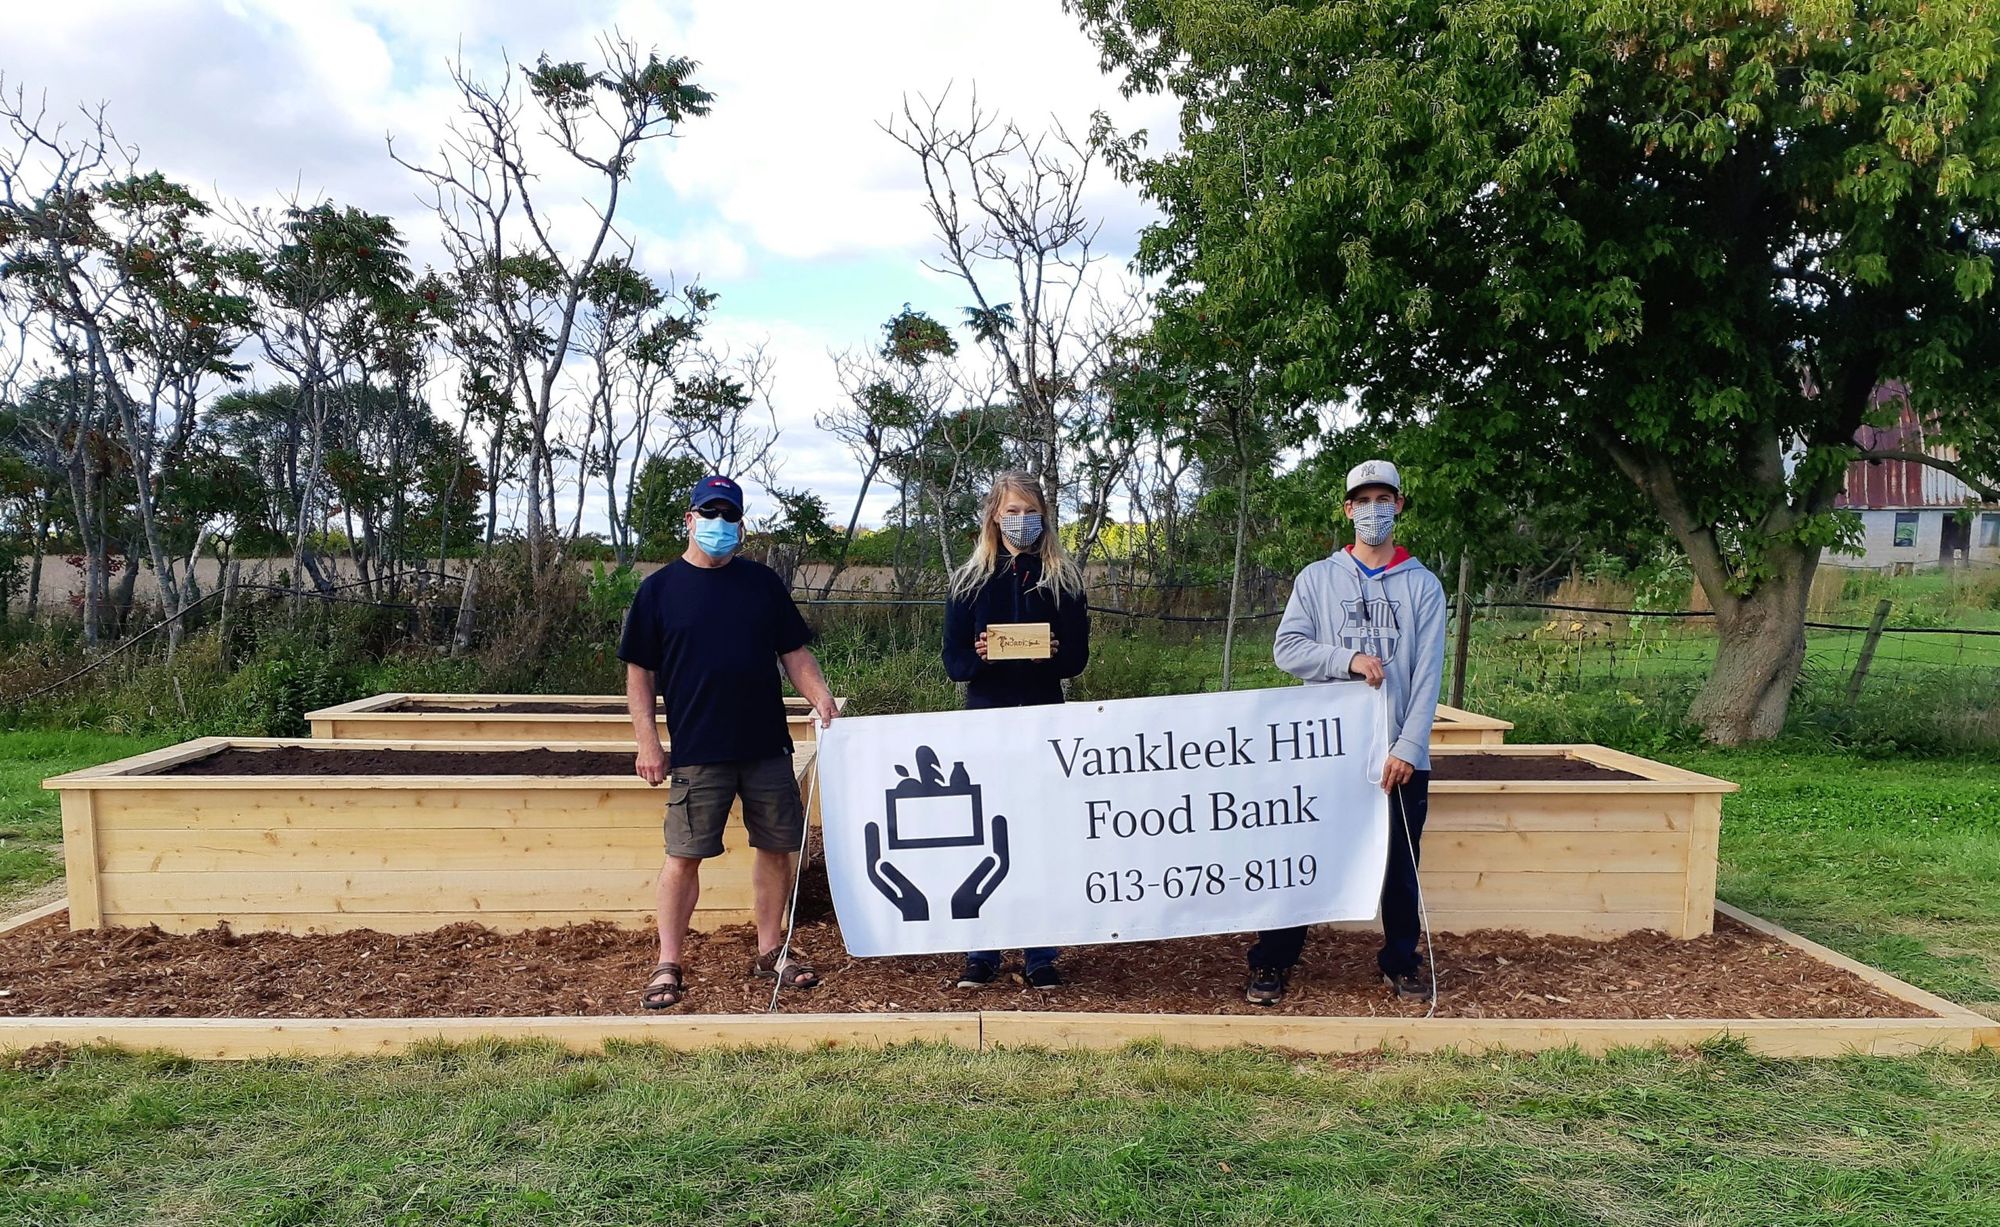 Vankleek Hill Food Bank Garden program expands access with Community Innovation grant